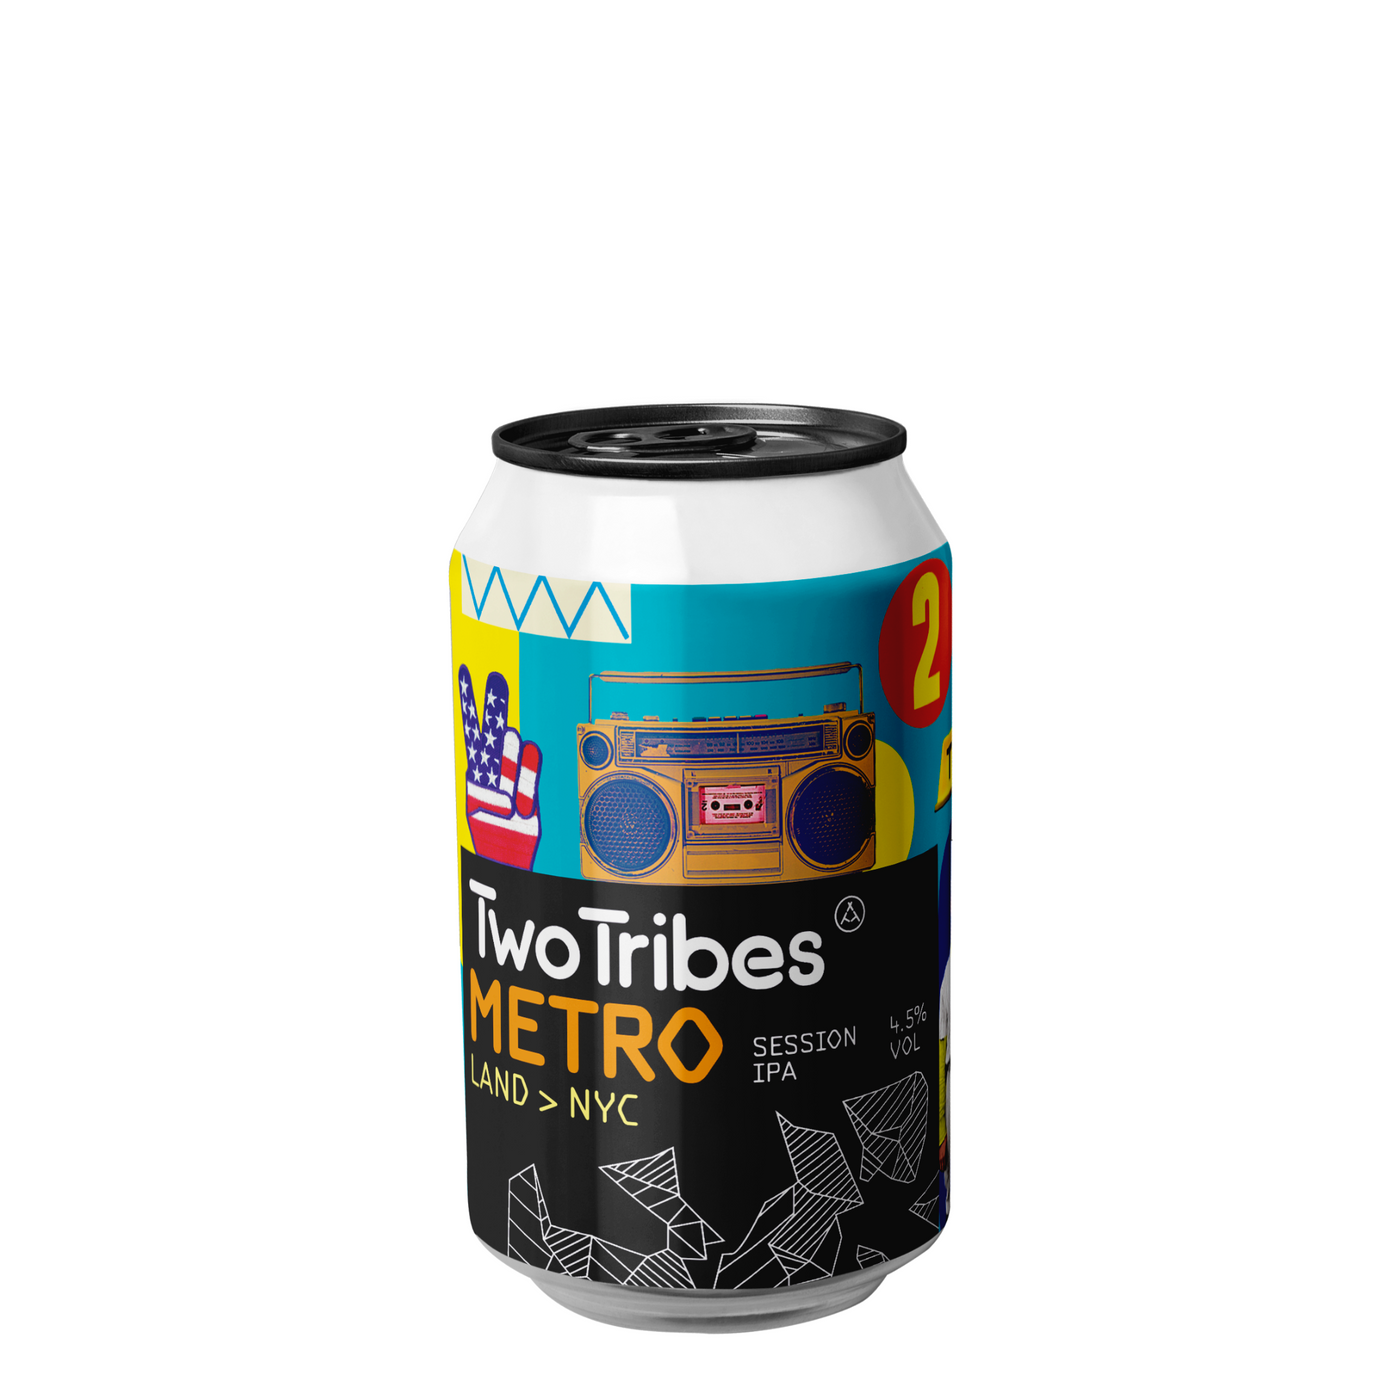 Two Tribes Metro Land NYC Session IPA